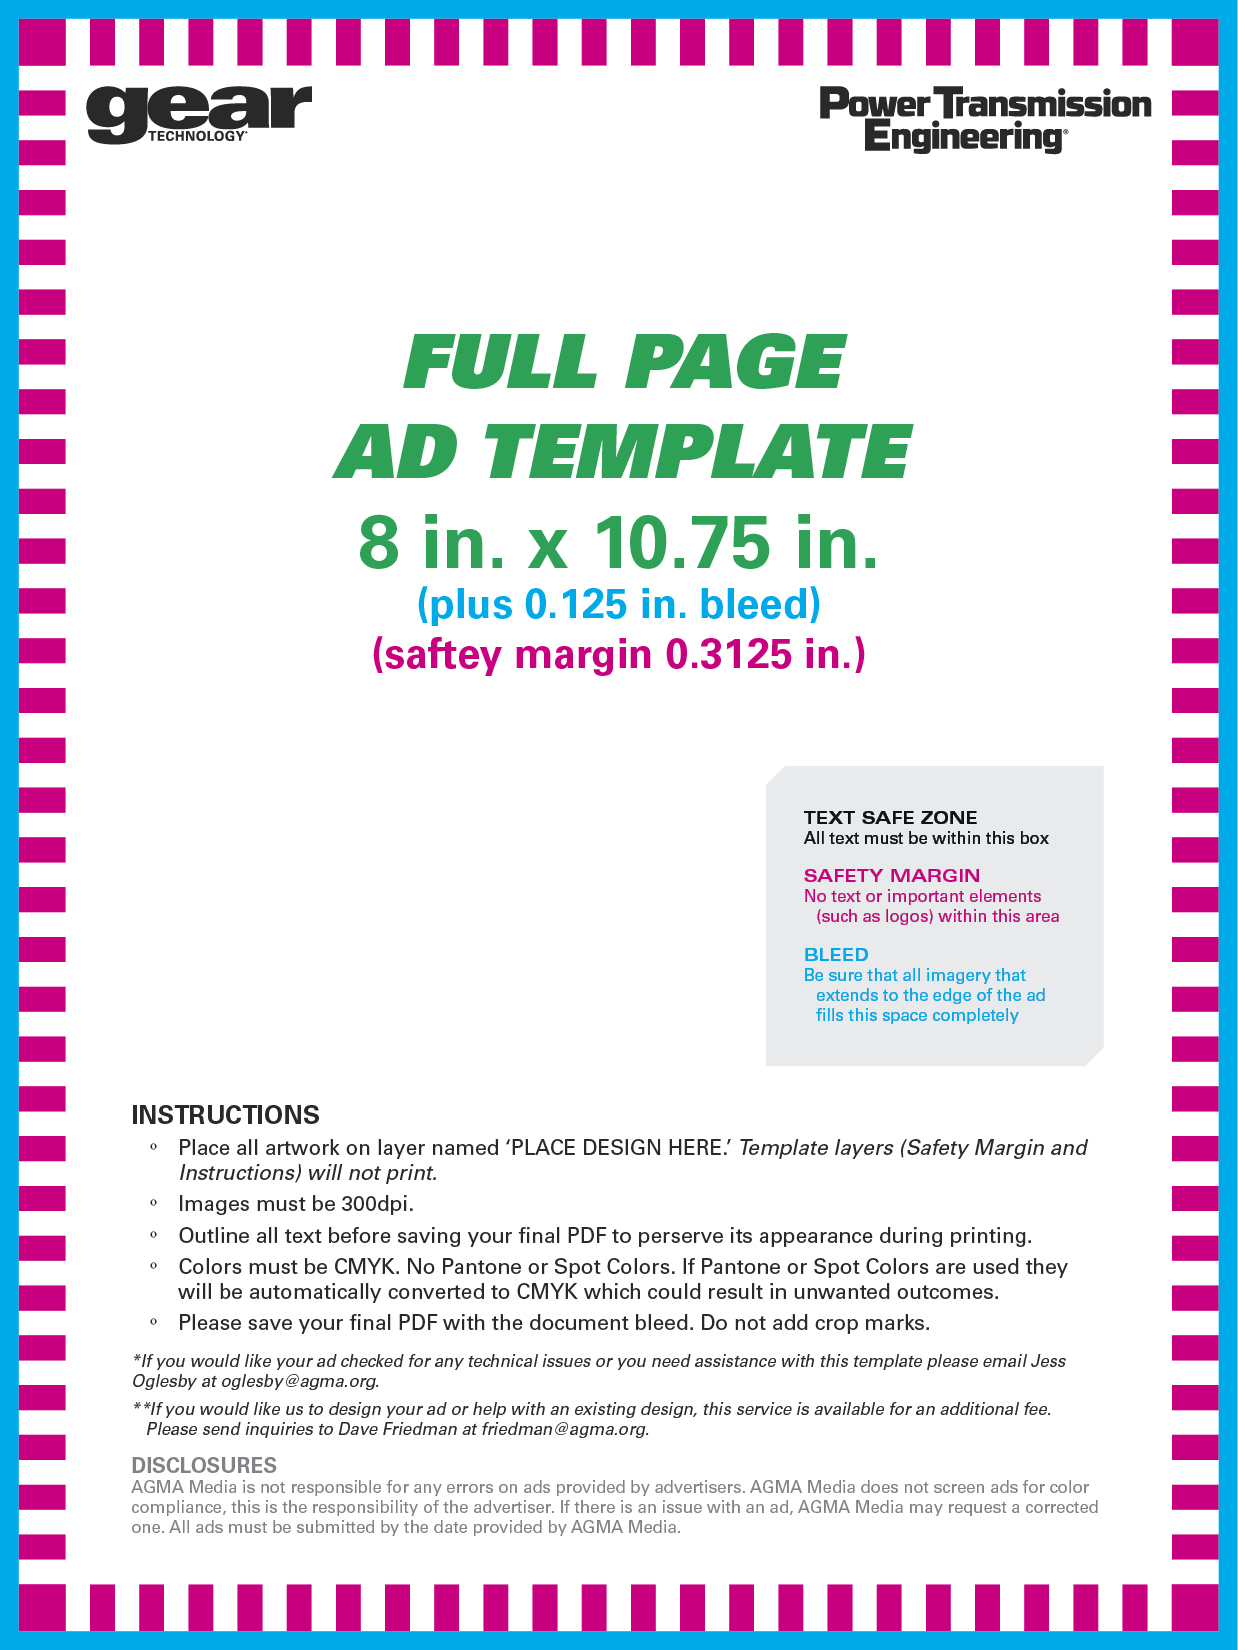 AGMA Media - Ad Template - Full Page.jpg